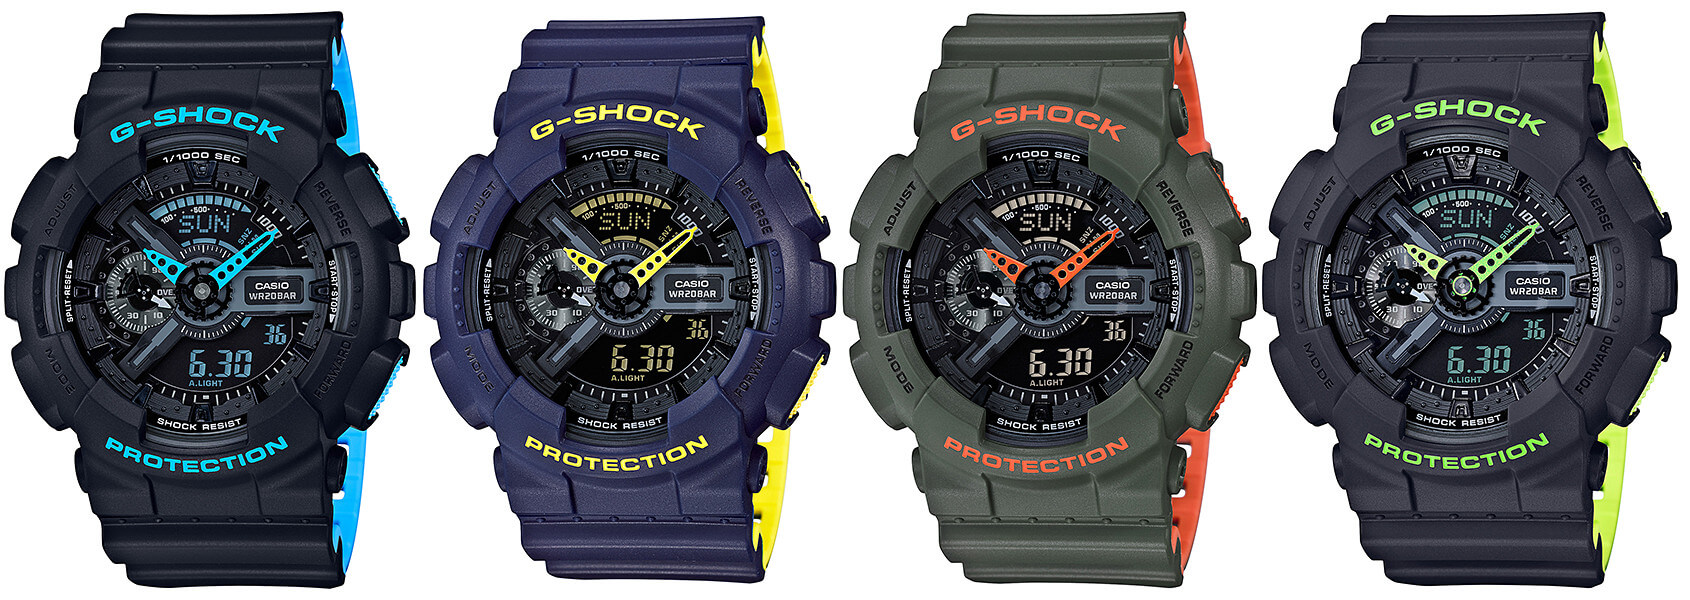 G-Shock GA-110LN Layered Neon Color Series - G-Central G-Shock Fan 